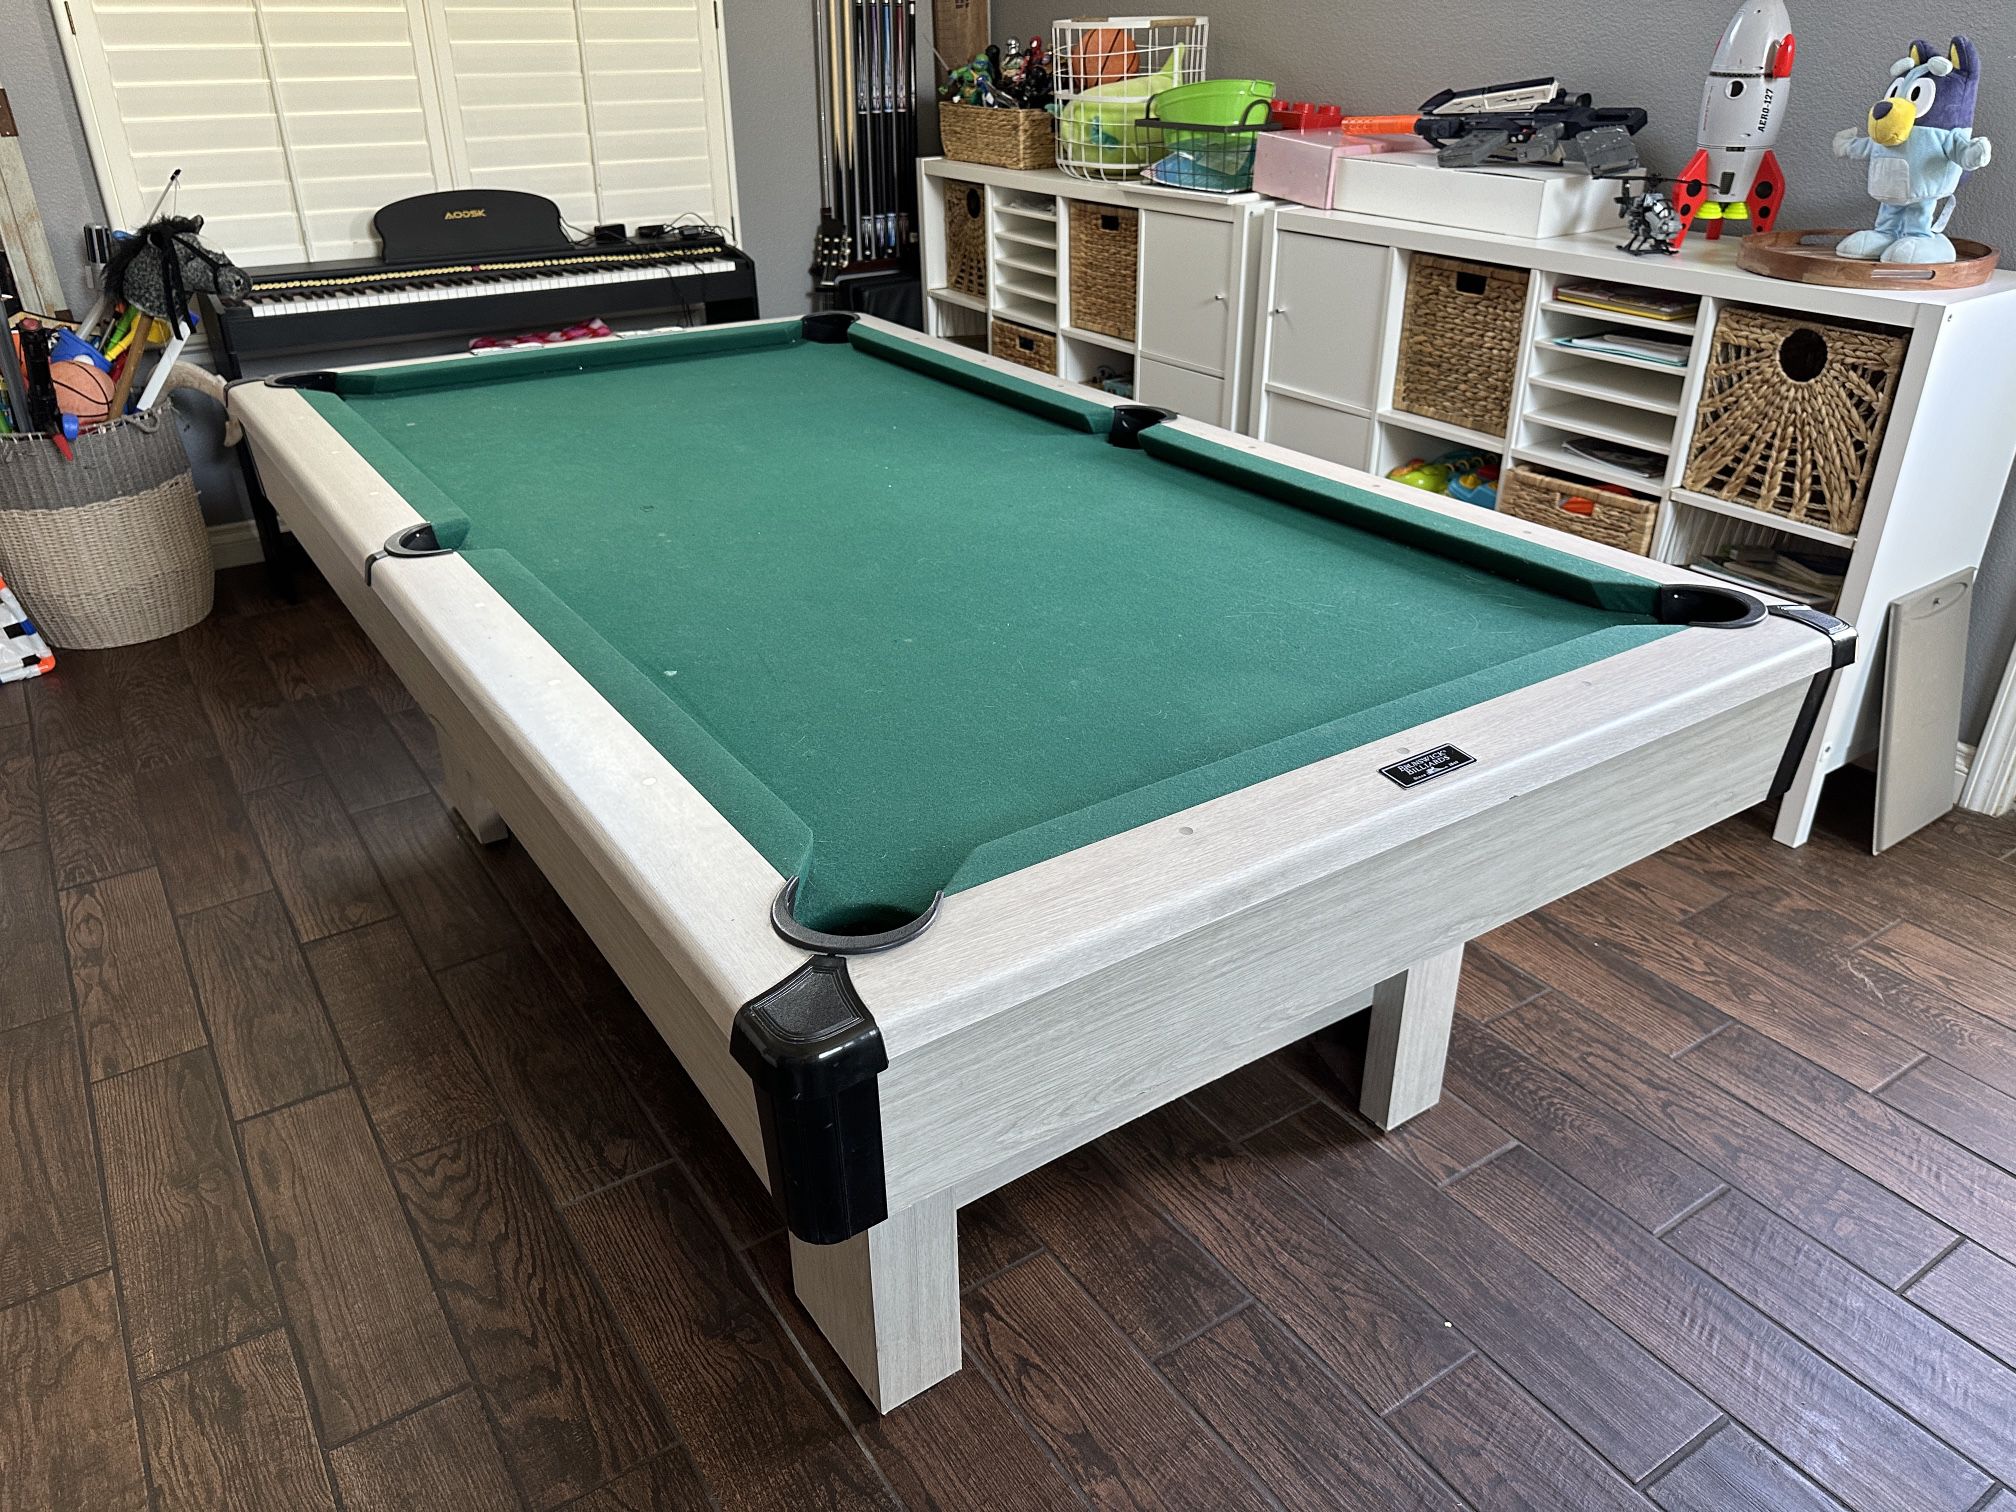 7' Pool Table with balls, cues, and more